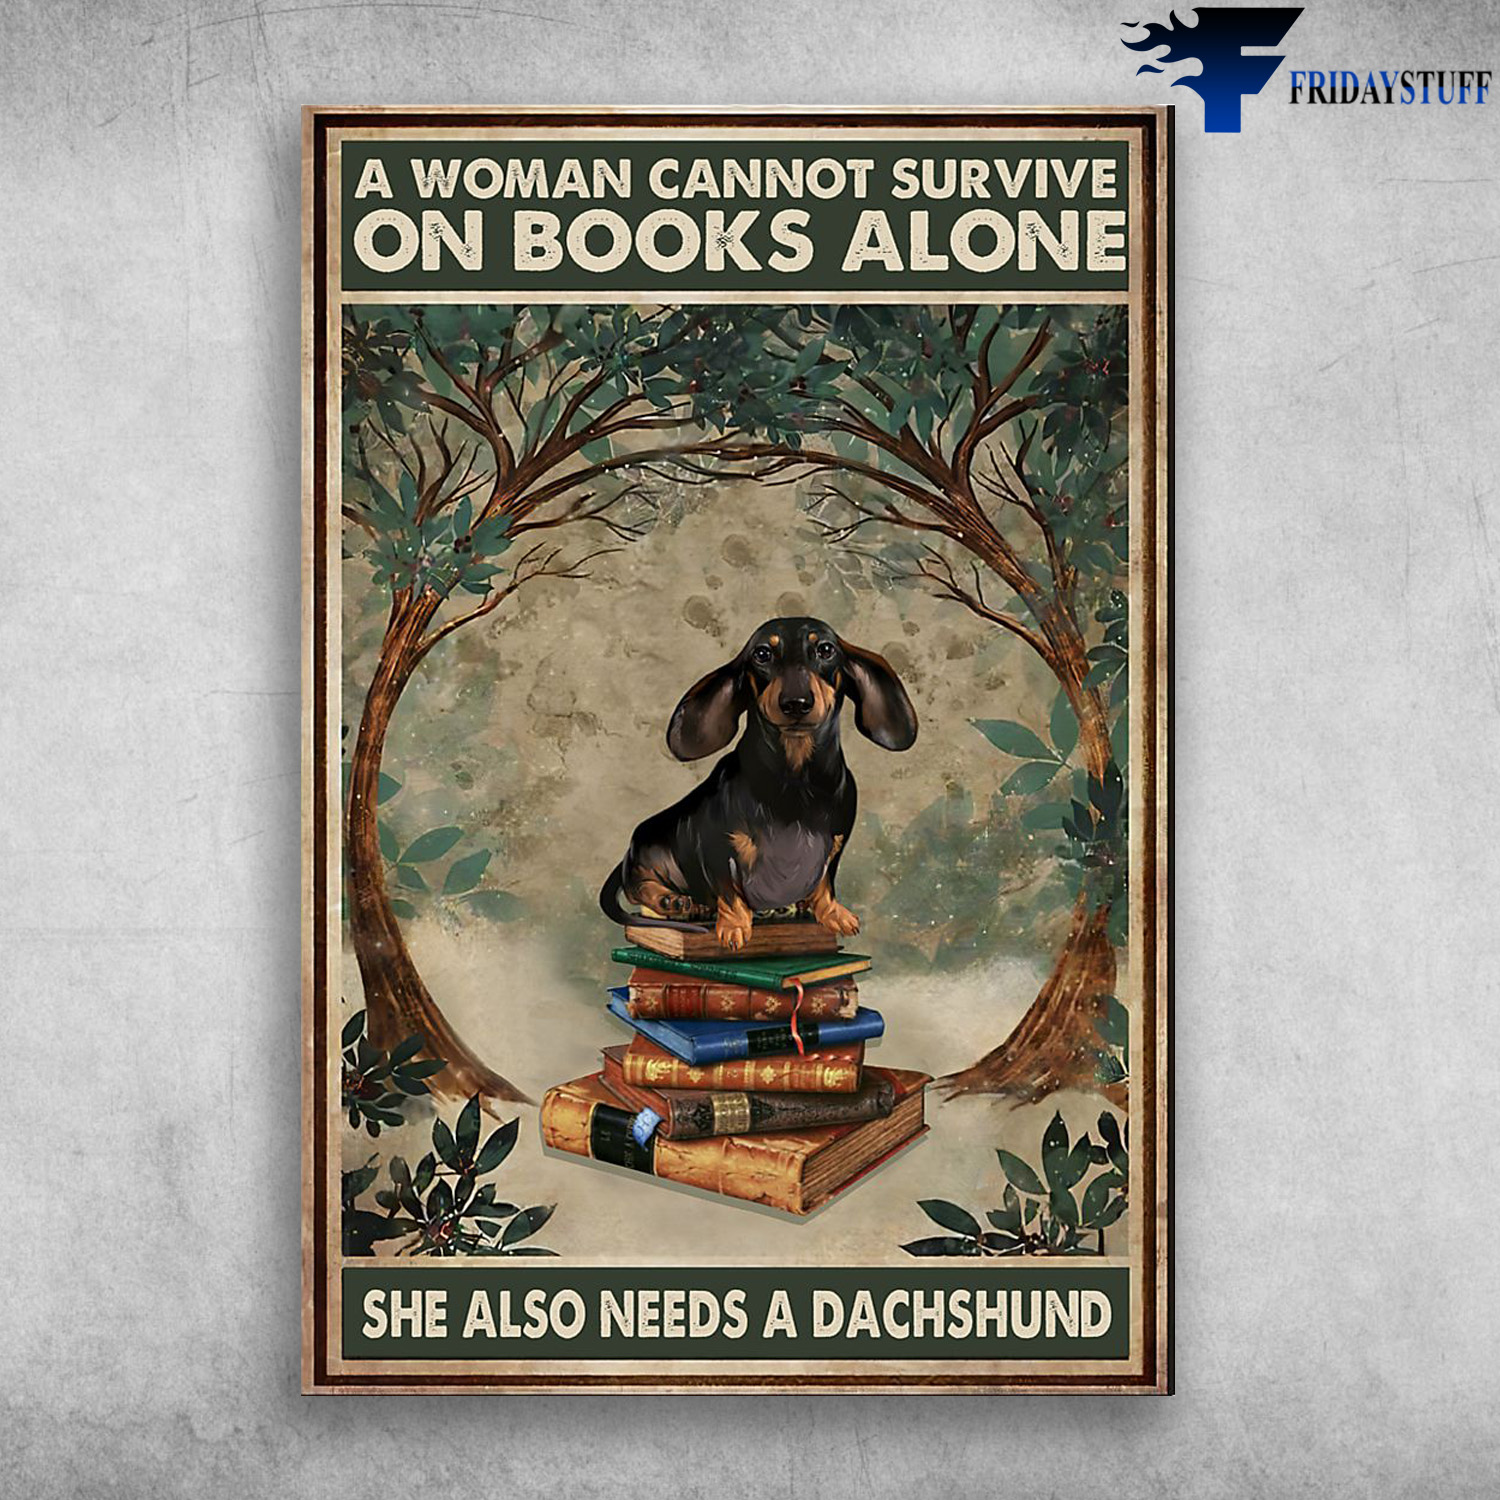 Dachshund Sitting On The Books - A Woman Cannot Survive On Books Alone, She Also Needs A Dachshund